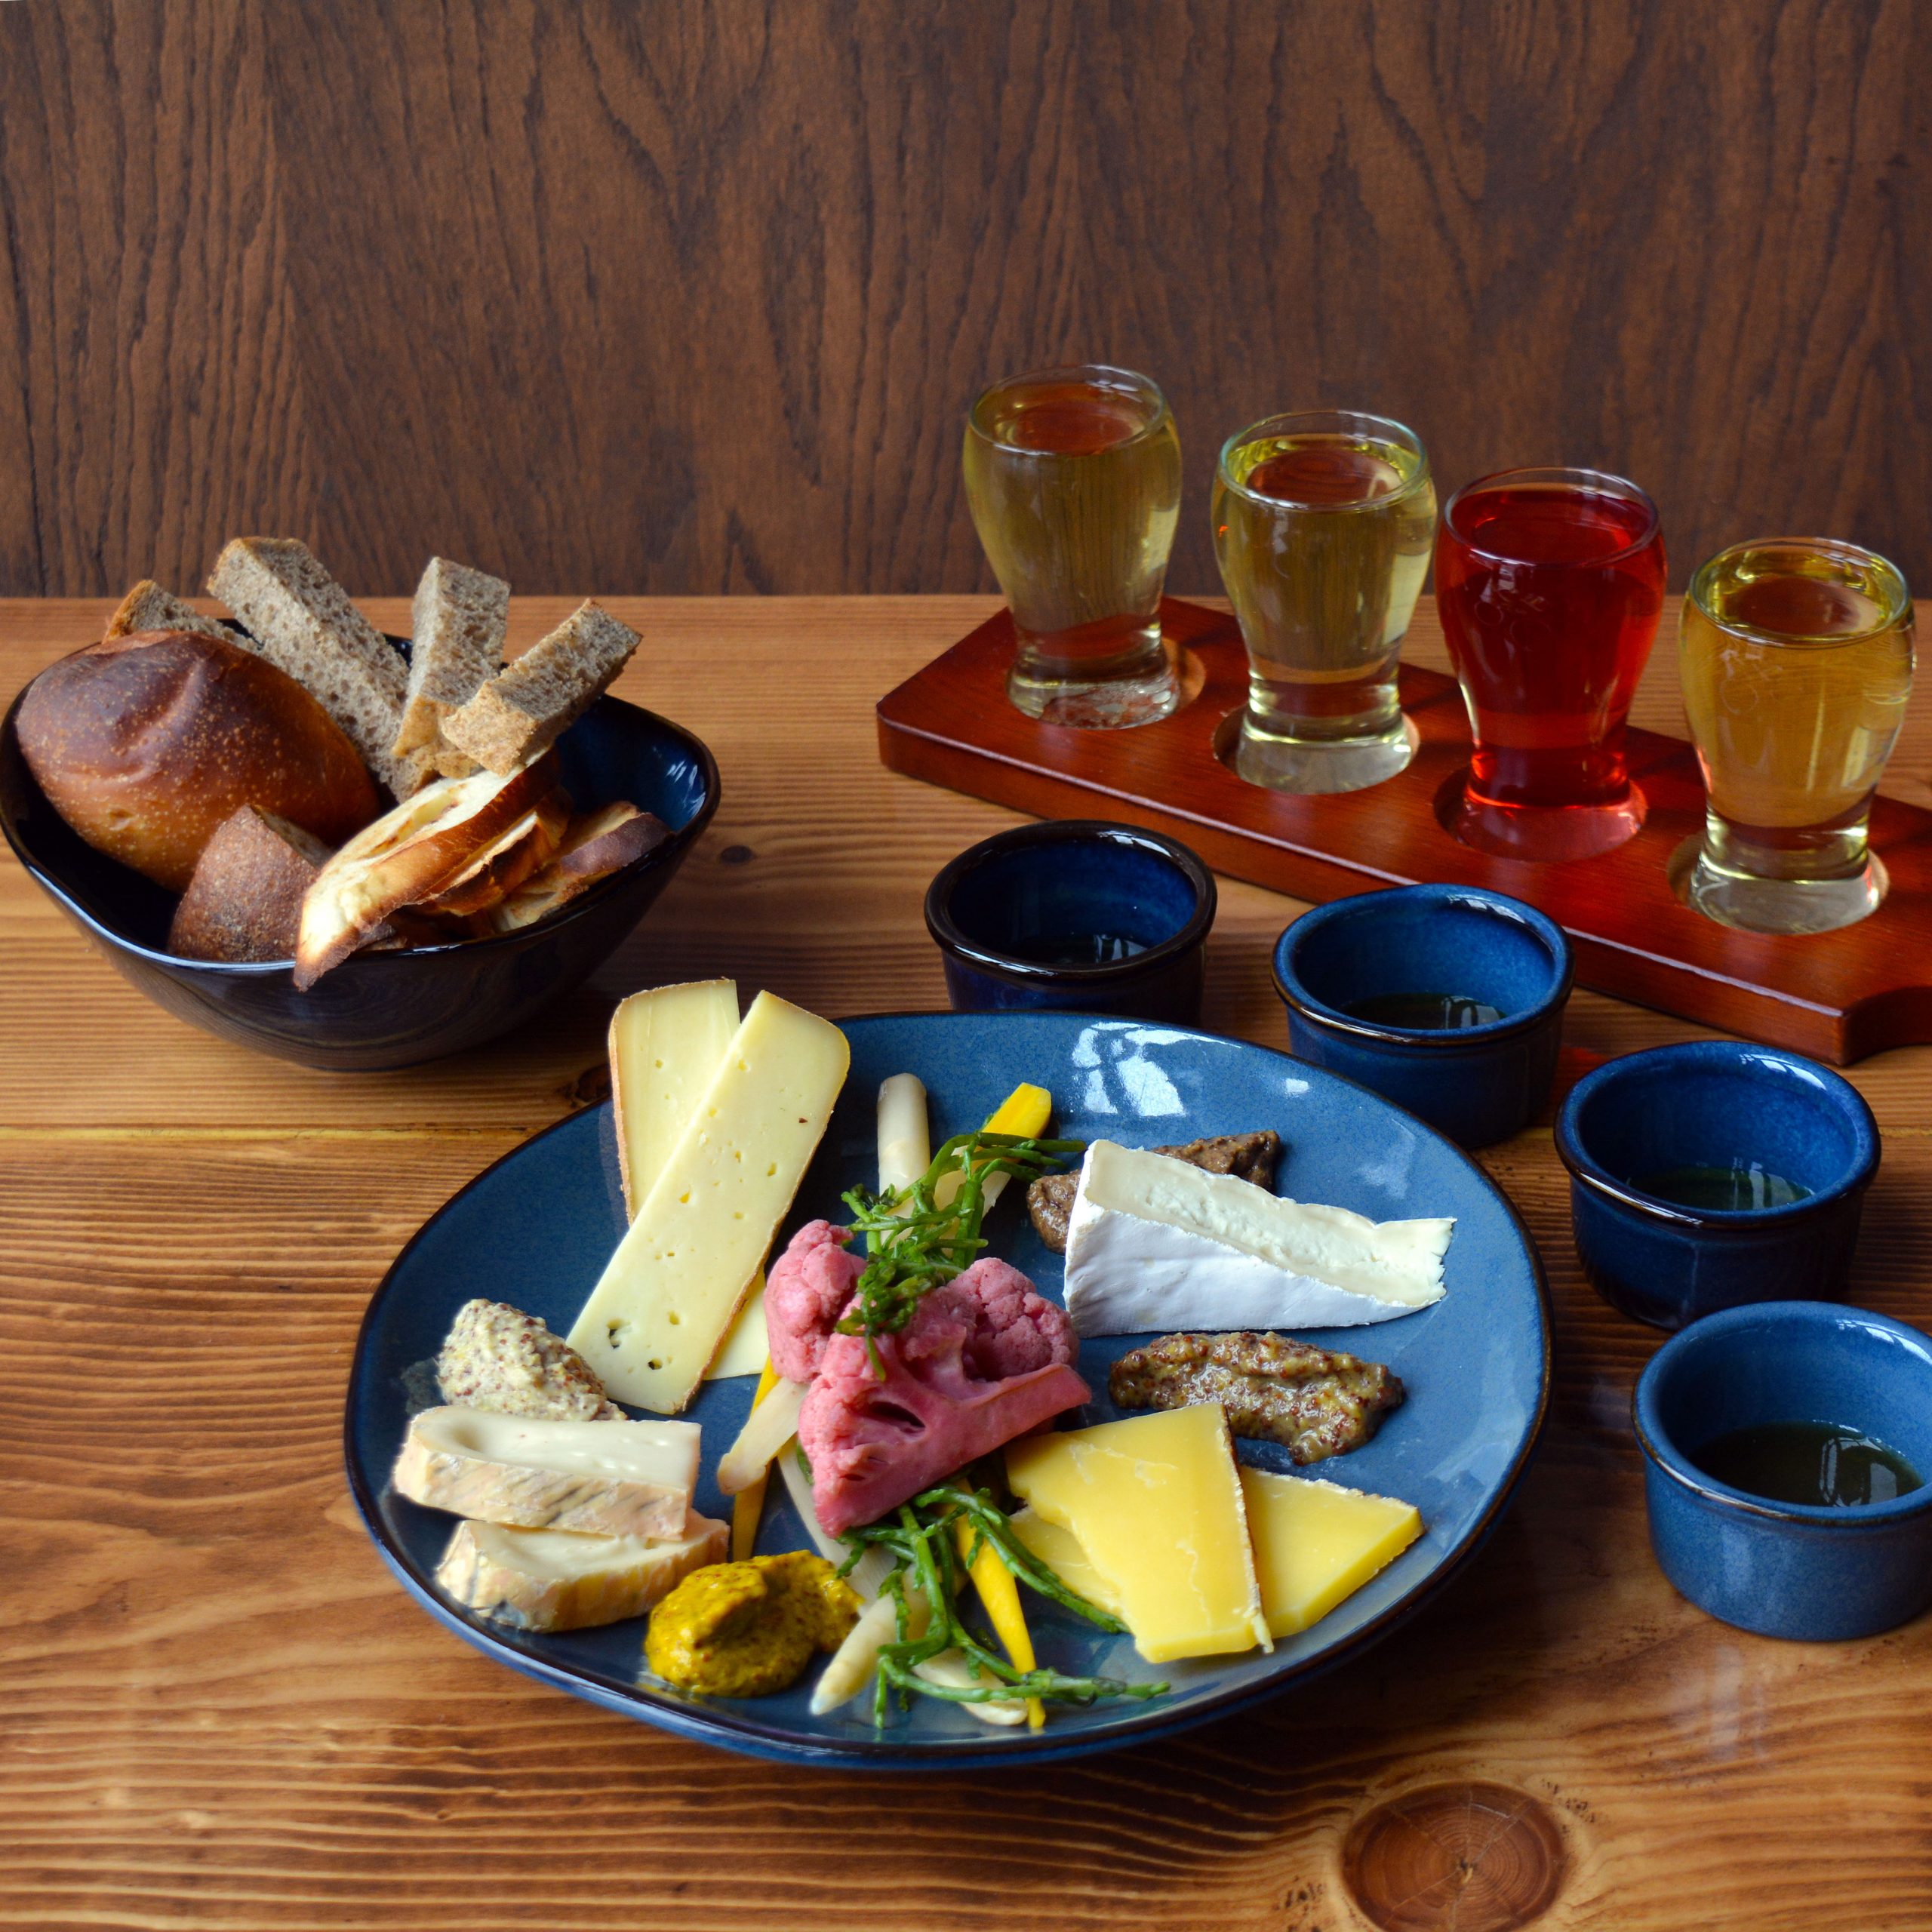 A charcuterie board with varieties of bread, cheese, honey, pickled vegetables, and artisanal mustards, with a flight of cider on the side